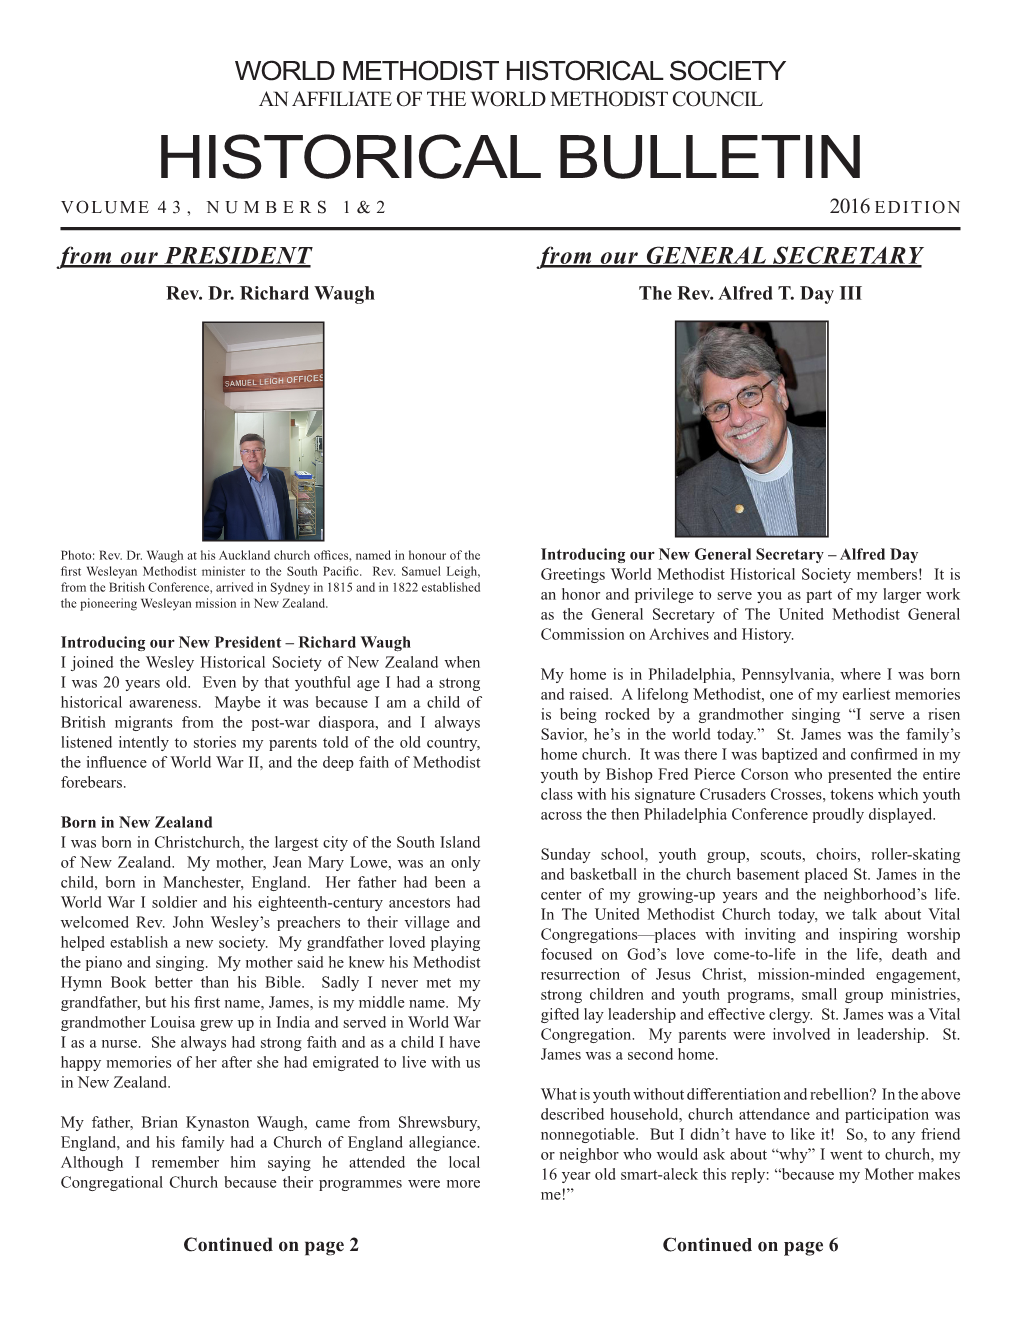 HISTORICAL BULLETIN VOLUME 43, NUMBERS 1&2 2016 EDITION from Our PRESIDENT from Our GENERAL SECRETARY Rev